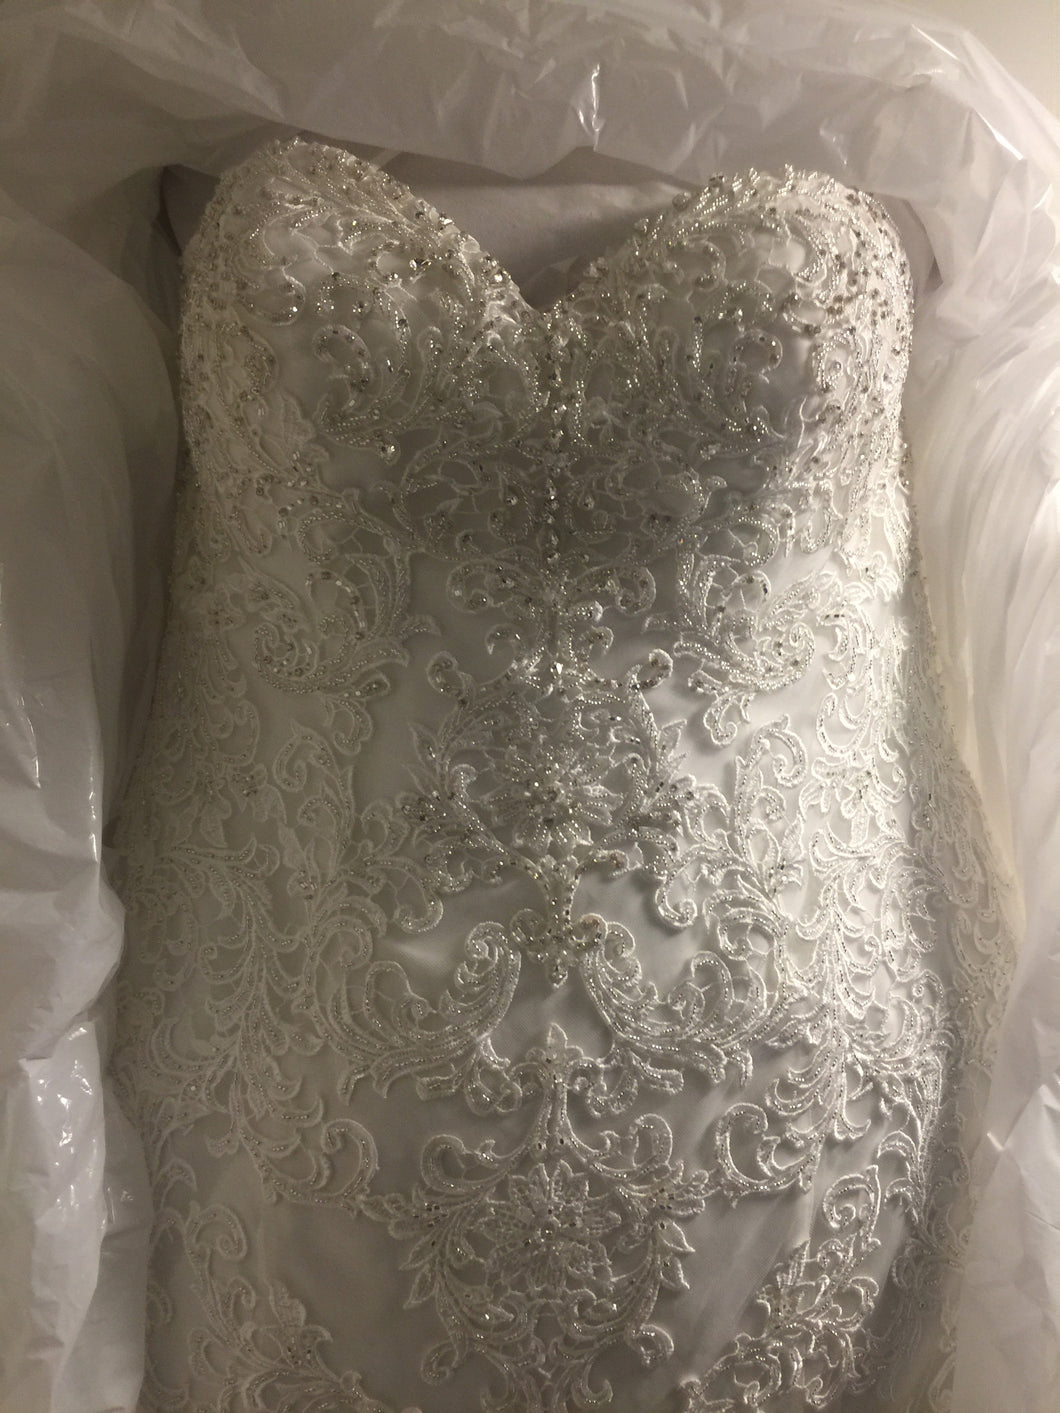 Maggie Sottero 'Stella' size 18 new wedding dress front view in box